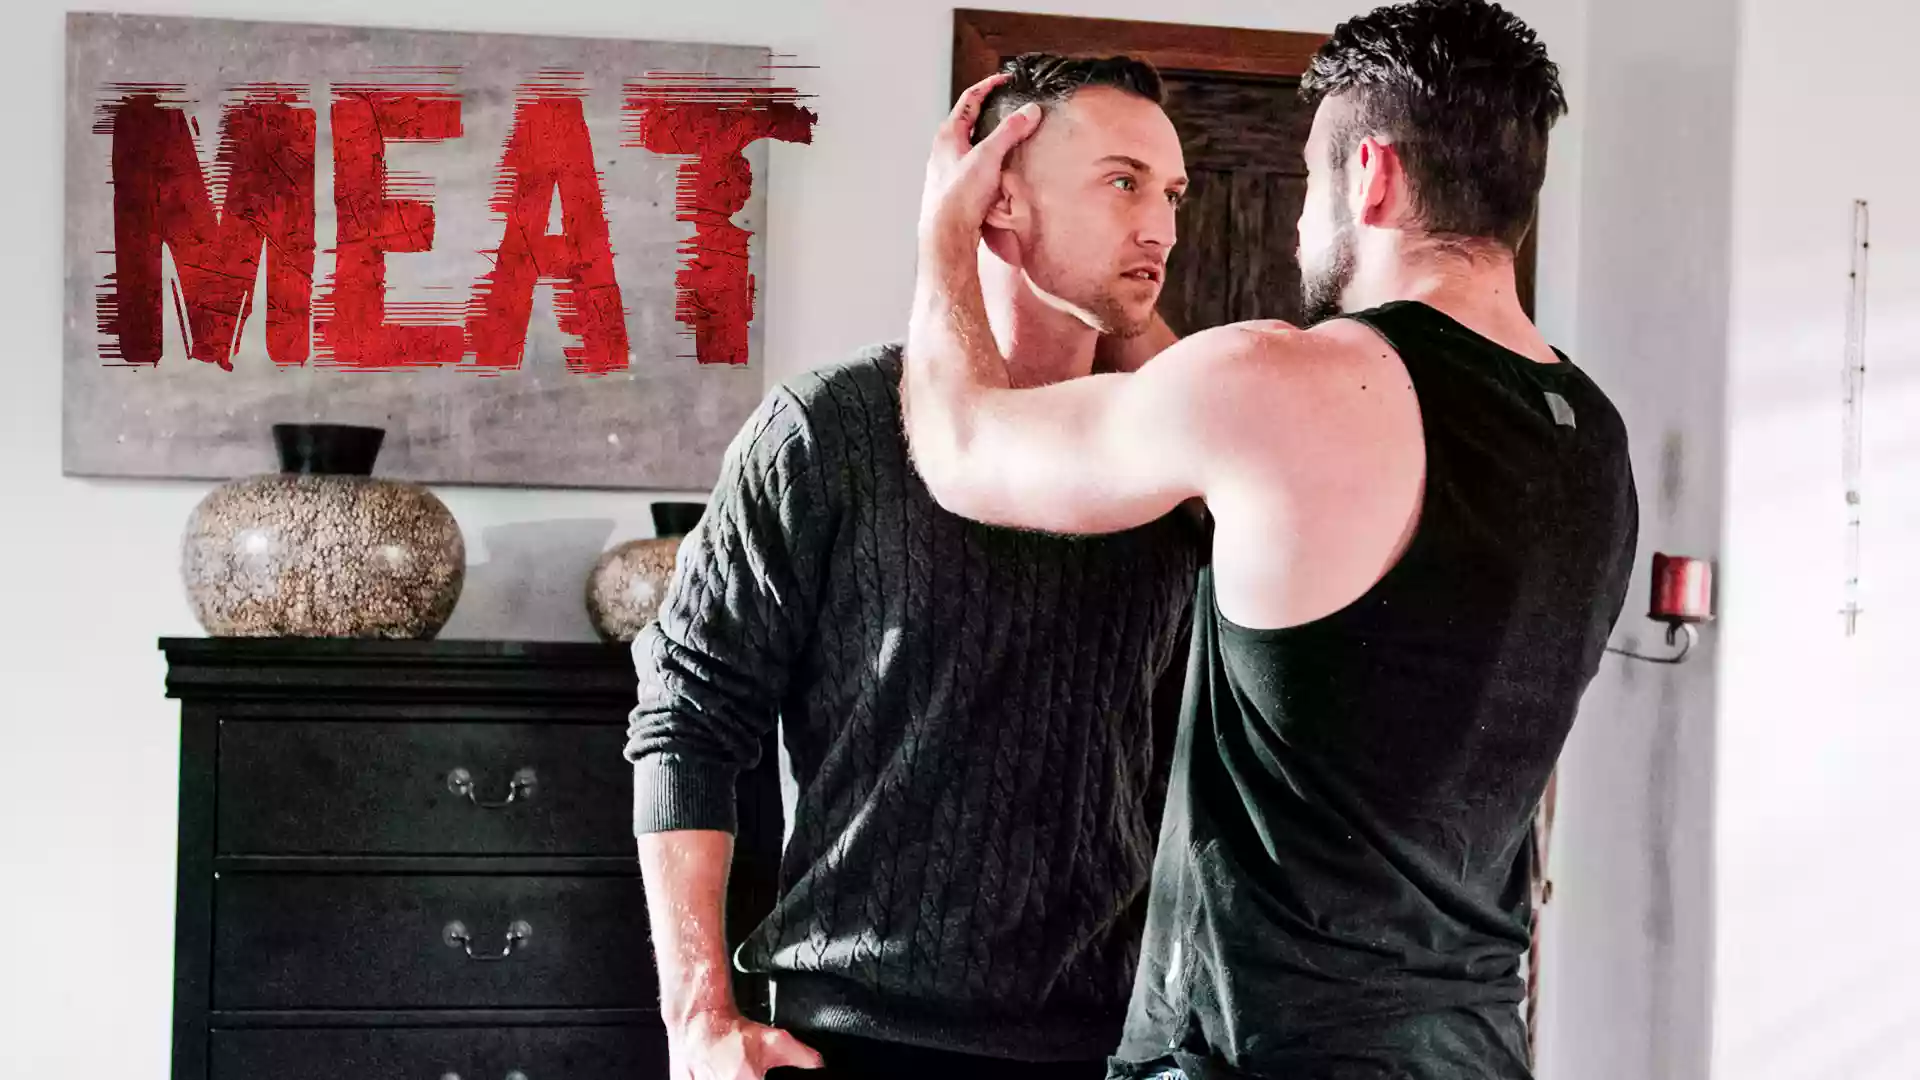 Meat – Dante Colle and Ethan Sinns